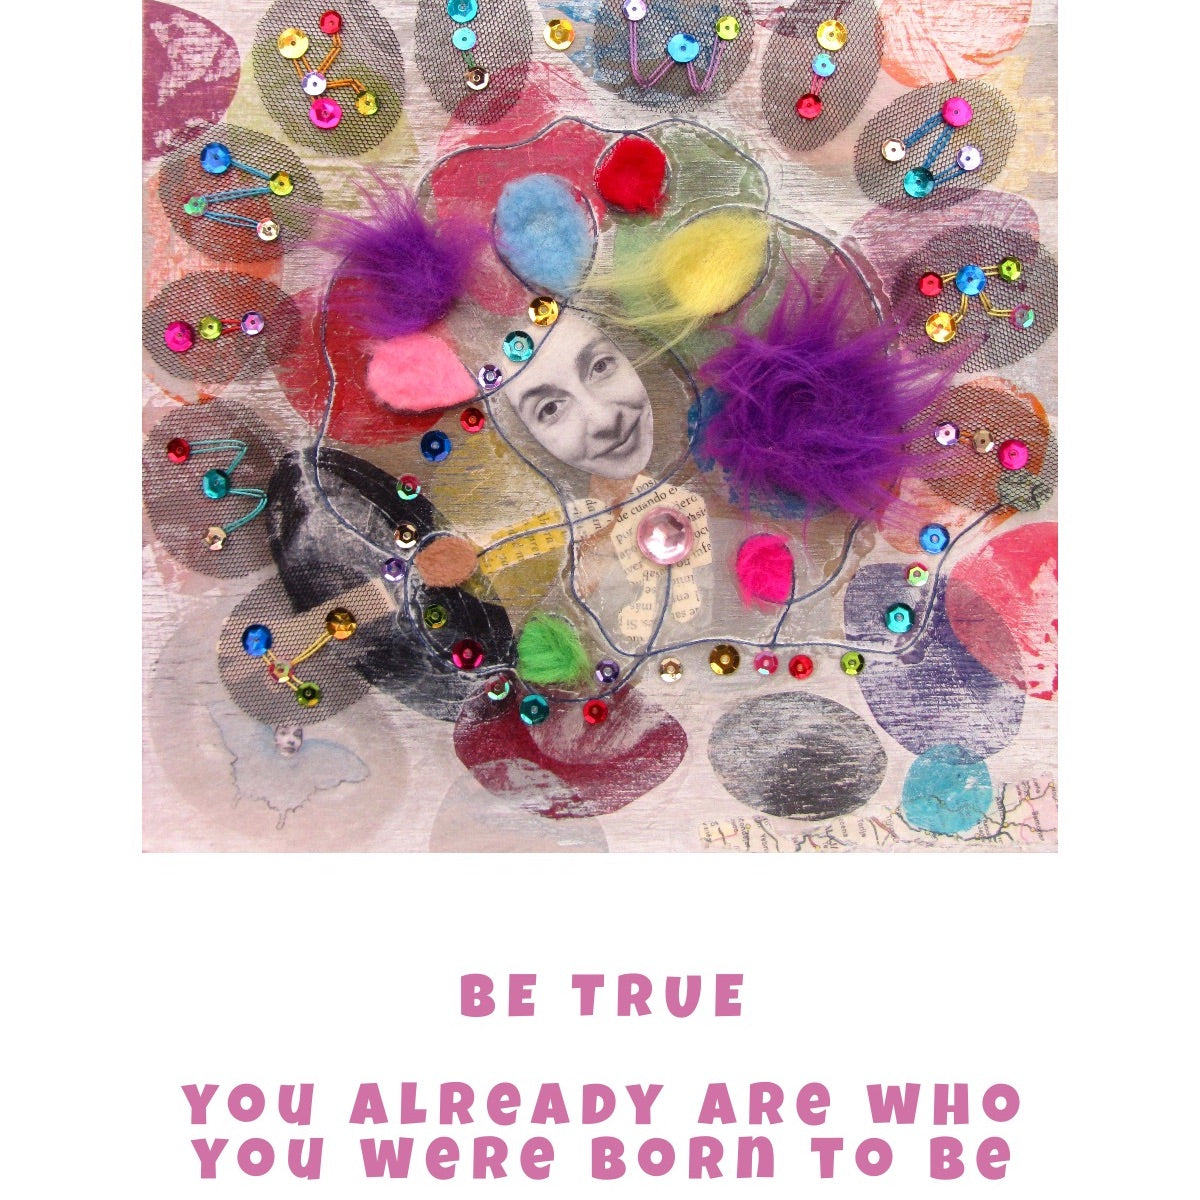 Fine art print of Alex Mitchell’s happy face surrounded by colorful shapes and textures with positive self-worth text message.